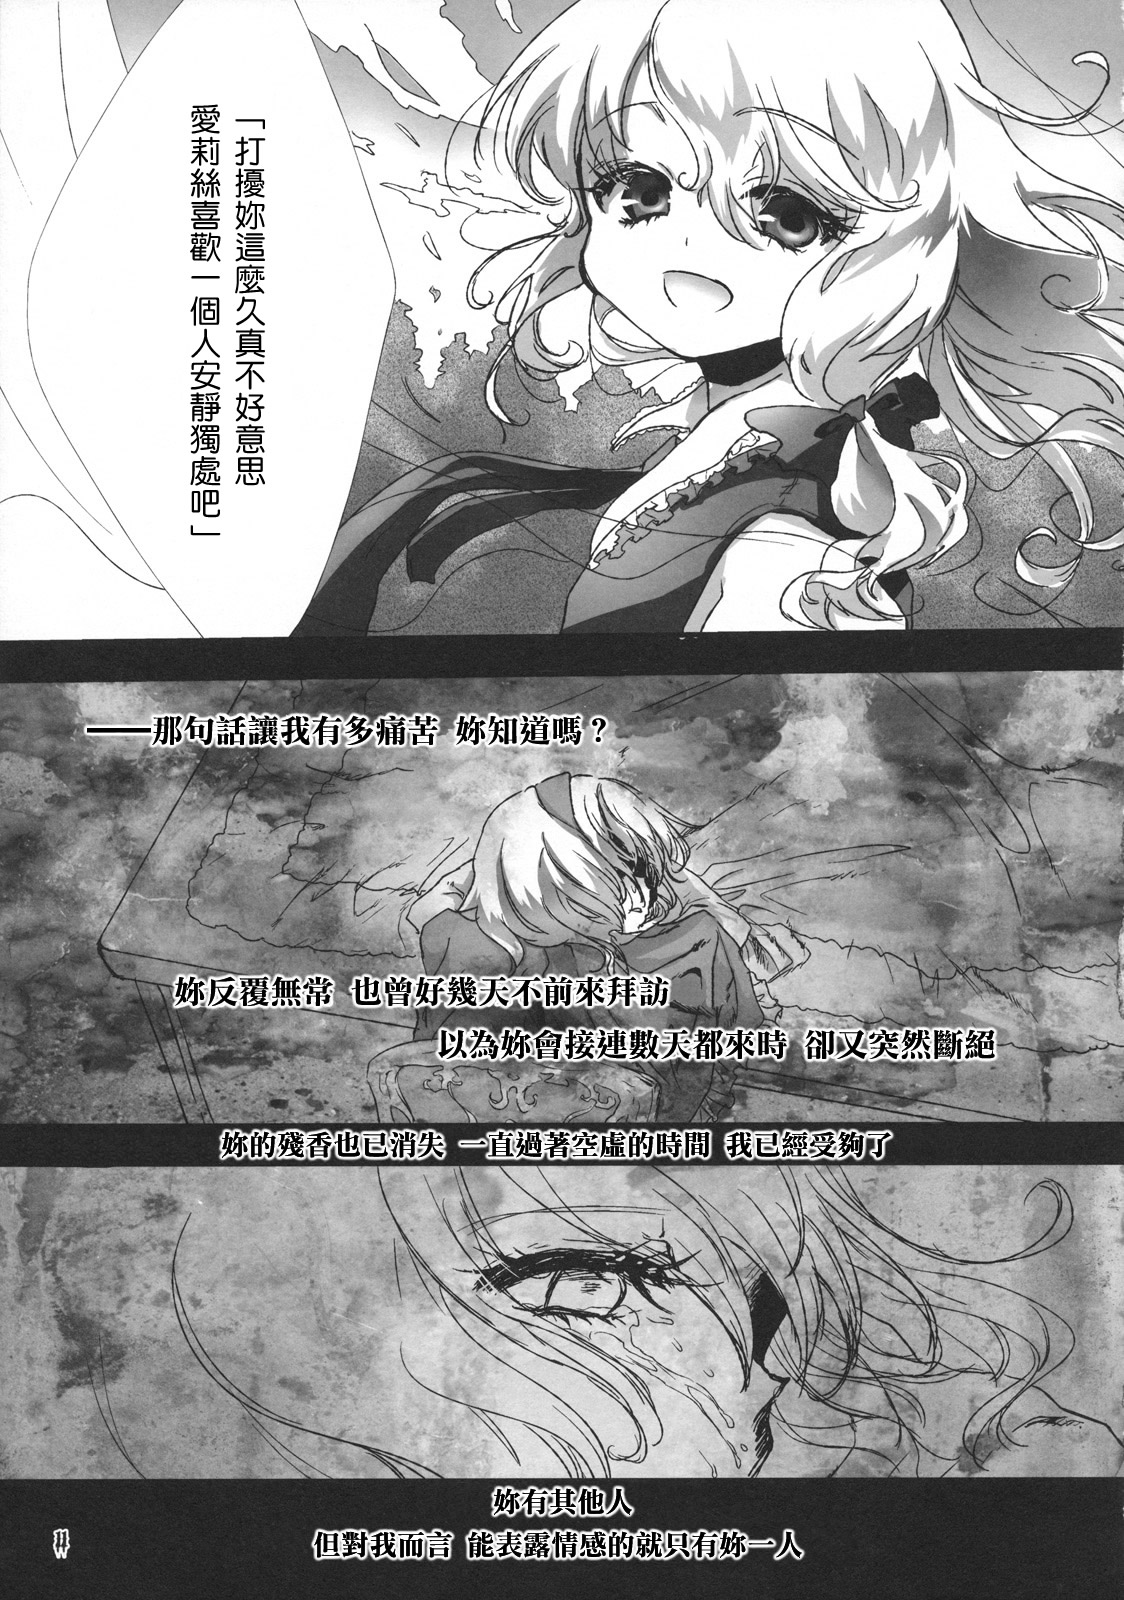 (C79) [Chaotic Wolf (Inuboe)] FILTH IN THE ENVY (Touhou Project) [Chinese] [Genesis漢化] (C79) (同人誌) [Chaotic Wolf (狗吠)] FILTH IN THE ENVY (東方) [中文翻譯]